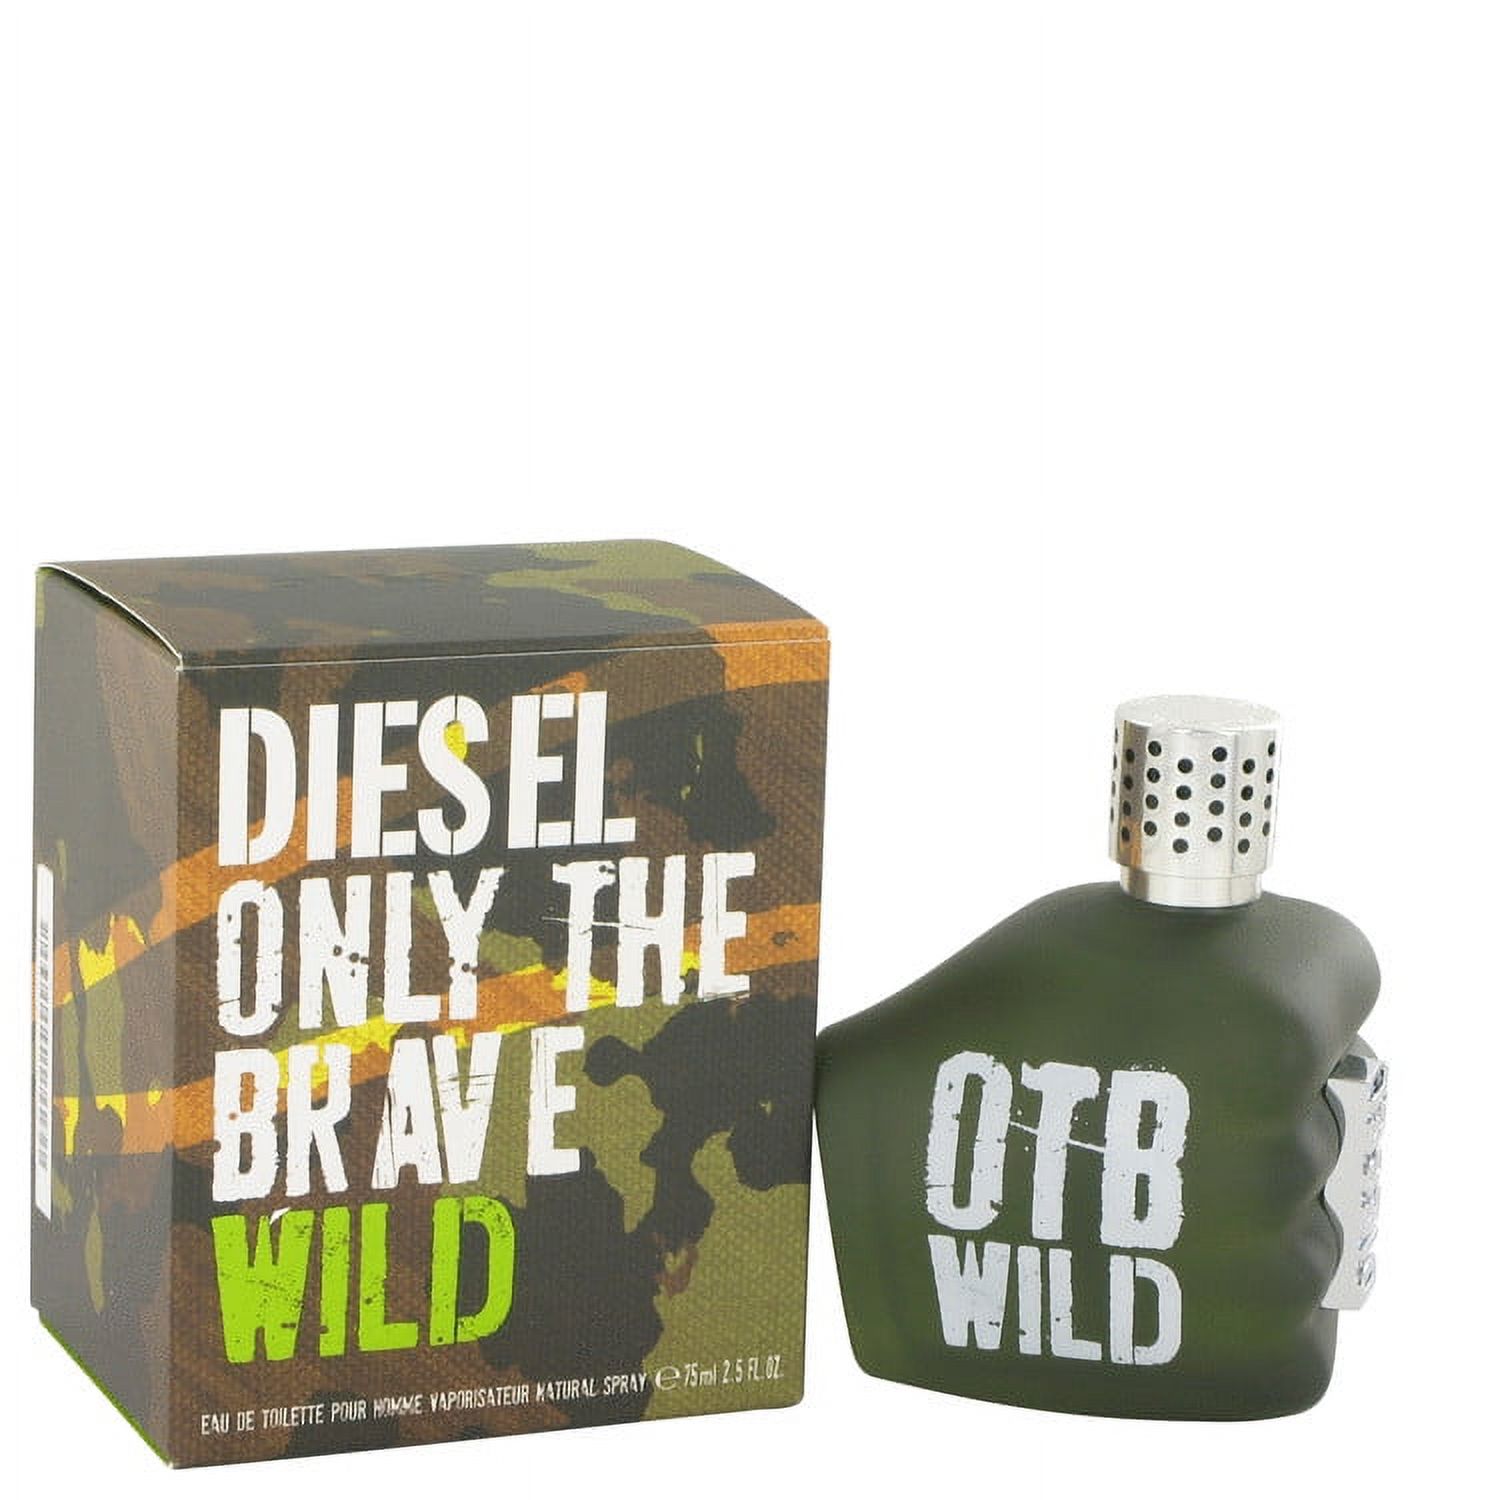 Only The Brave Wild by Diesel - image 1 of 1